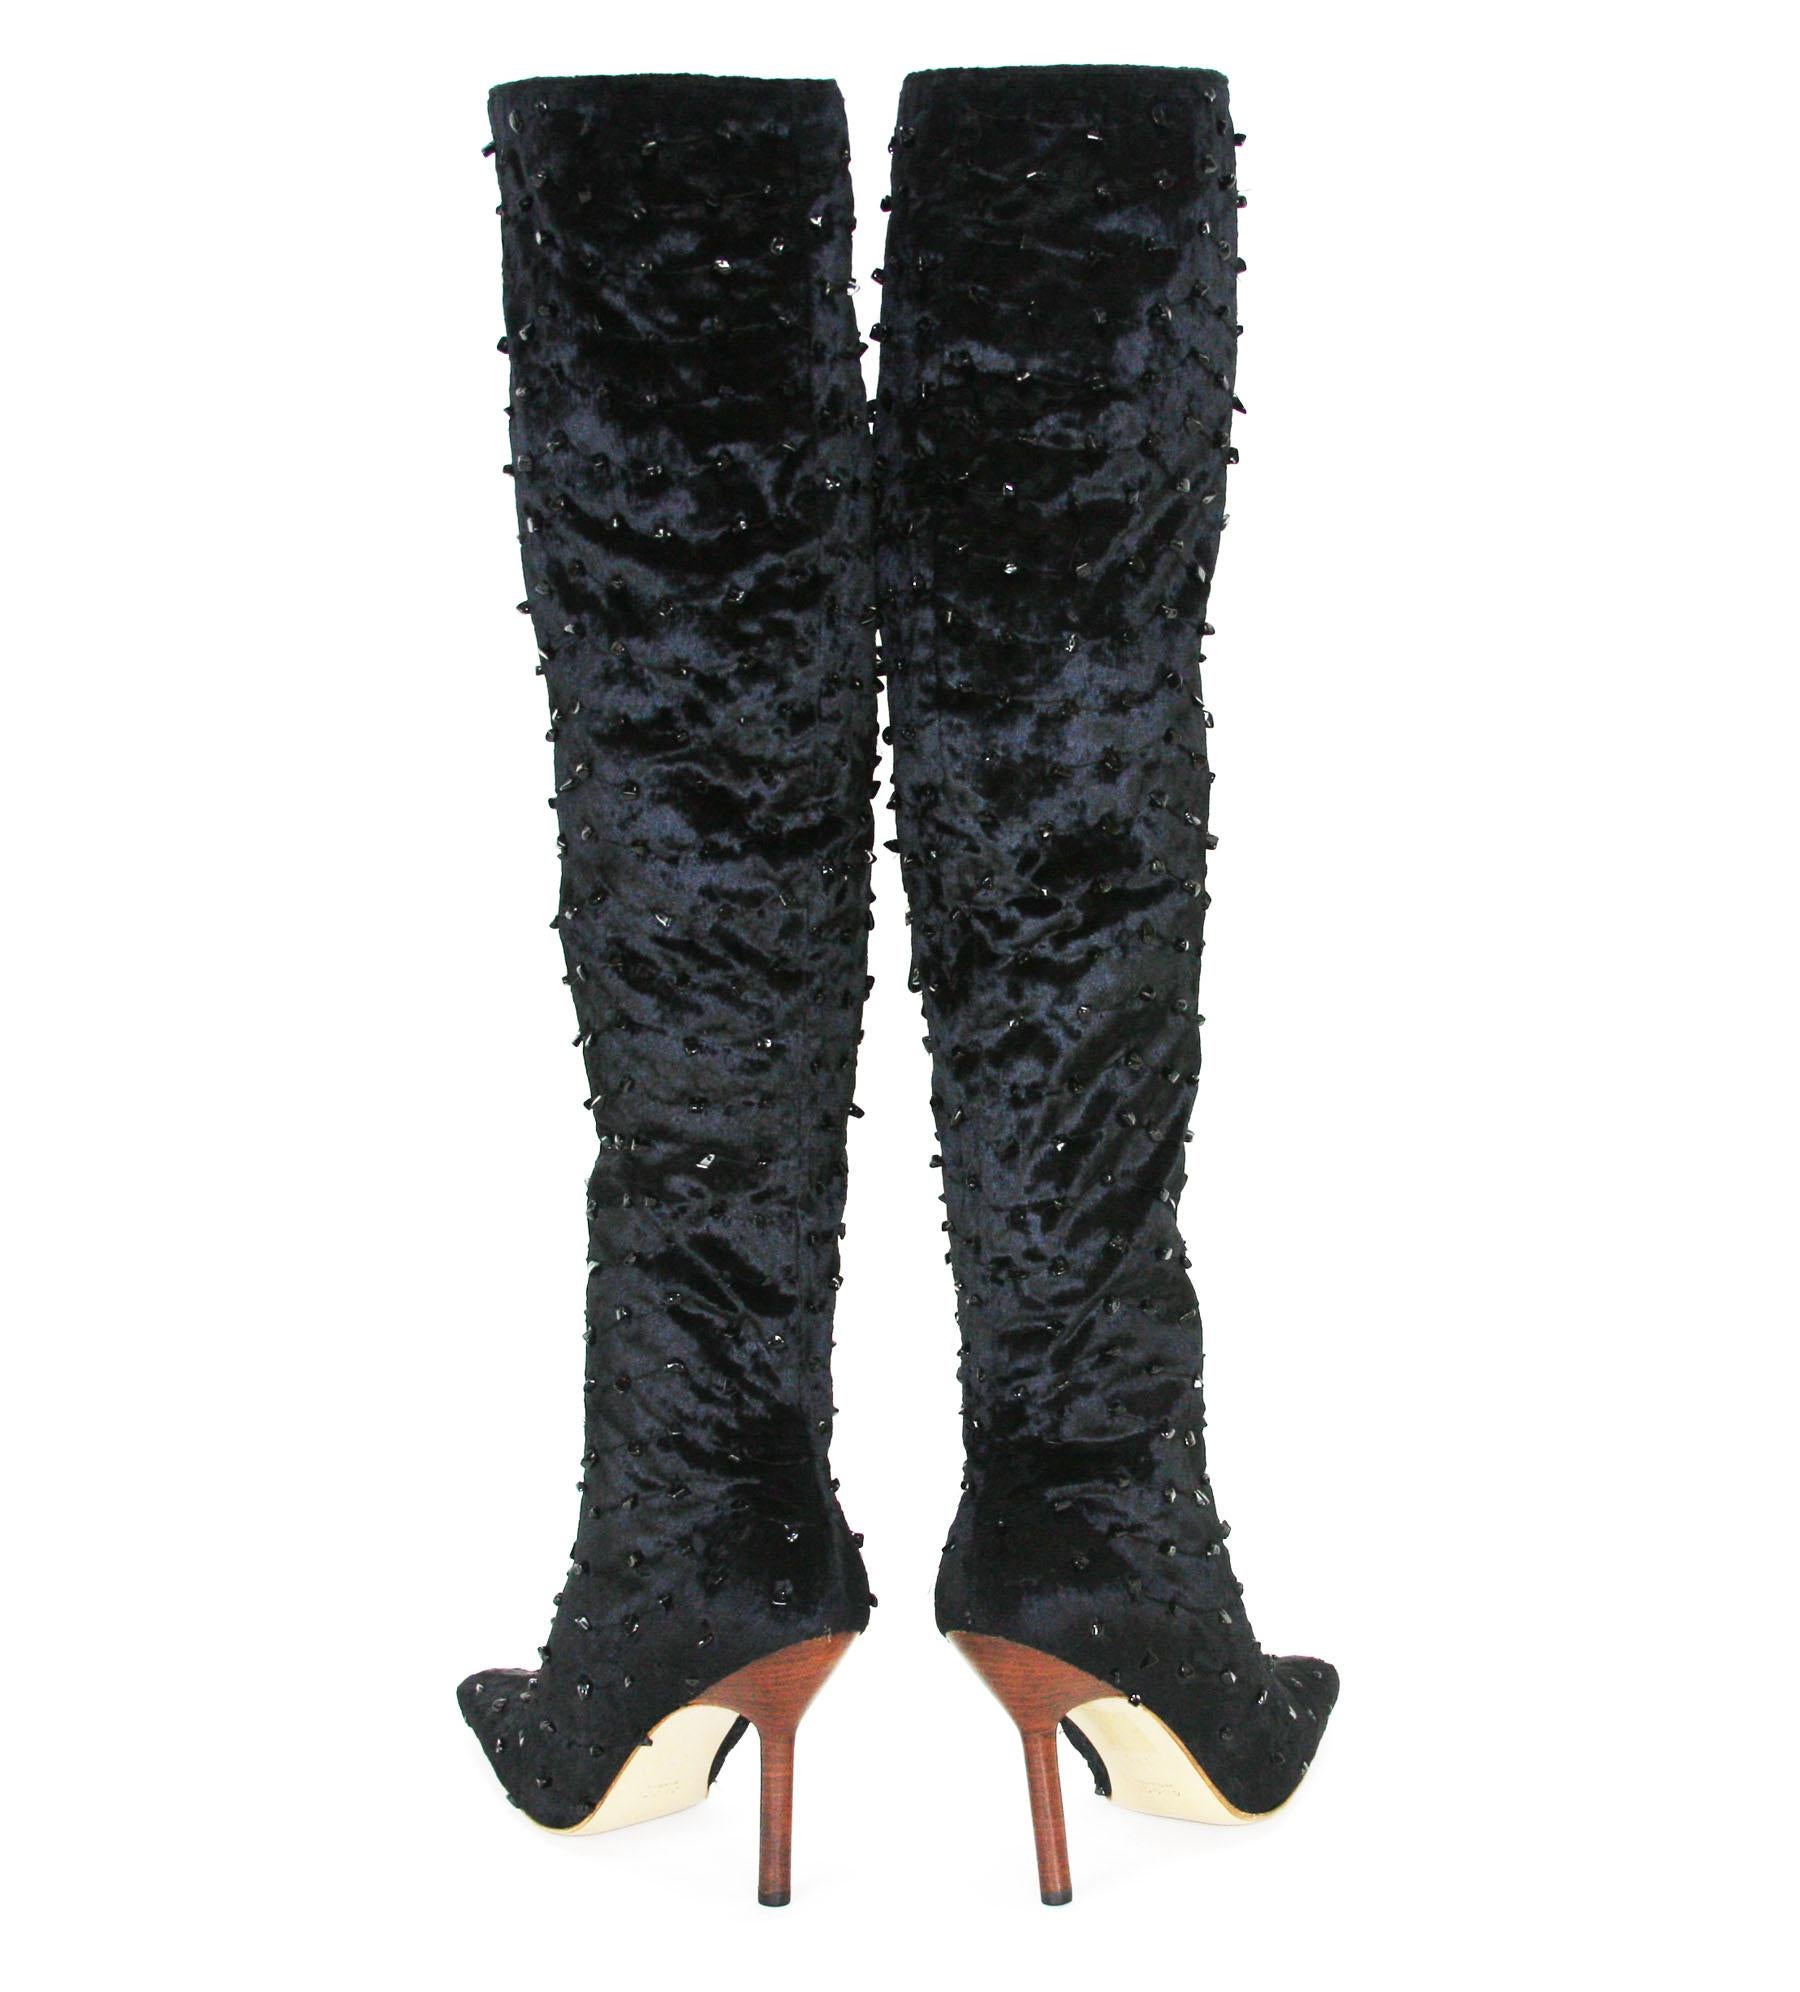 Tom Ford for Gucci Runway Black Onyx Beaded Velvet Knee Boots
Vintage F/W 1999 Collection
Designer size 37 C - US 7 C ( size 37.5 in used condition also available )
Sexy and Elegant Style, Beaded with Black Onyx, Partly Zip Closure, Pointed